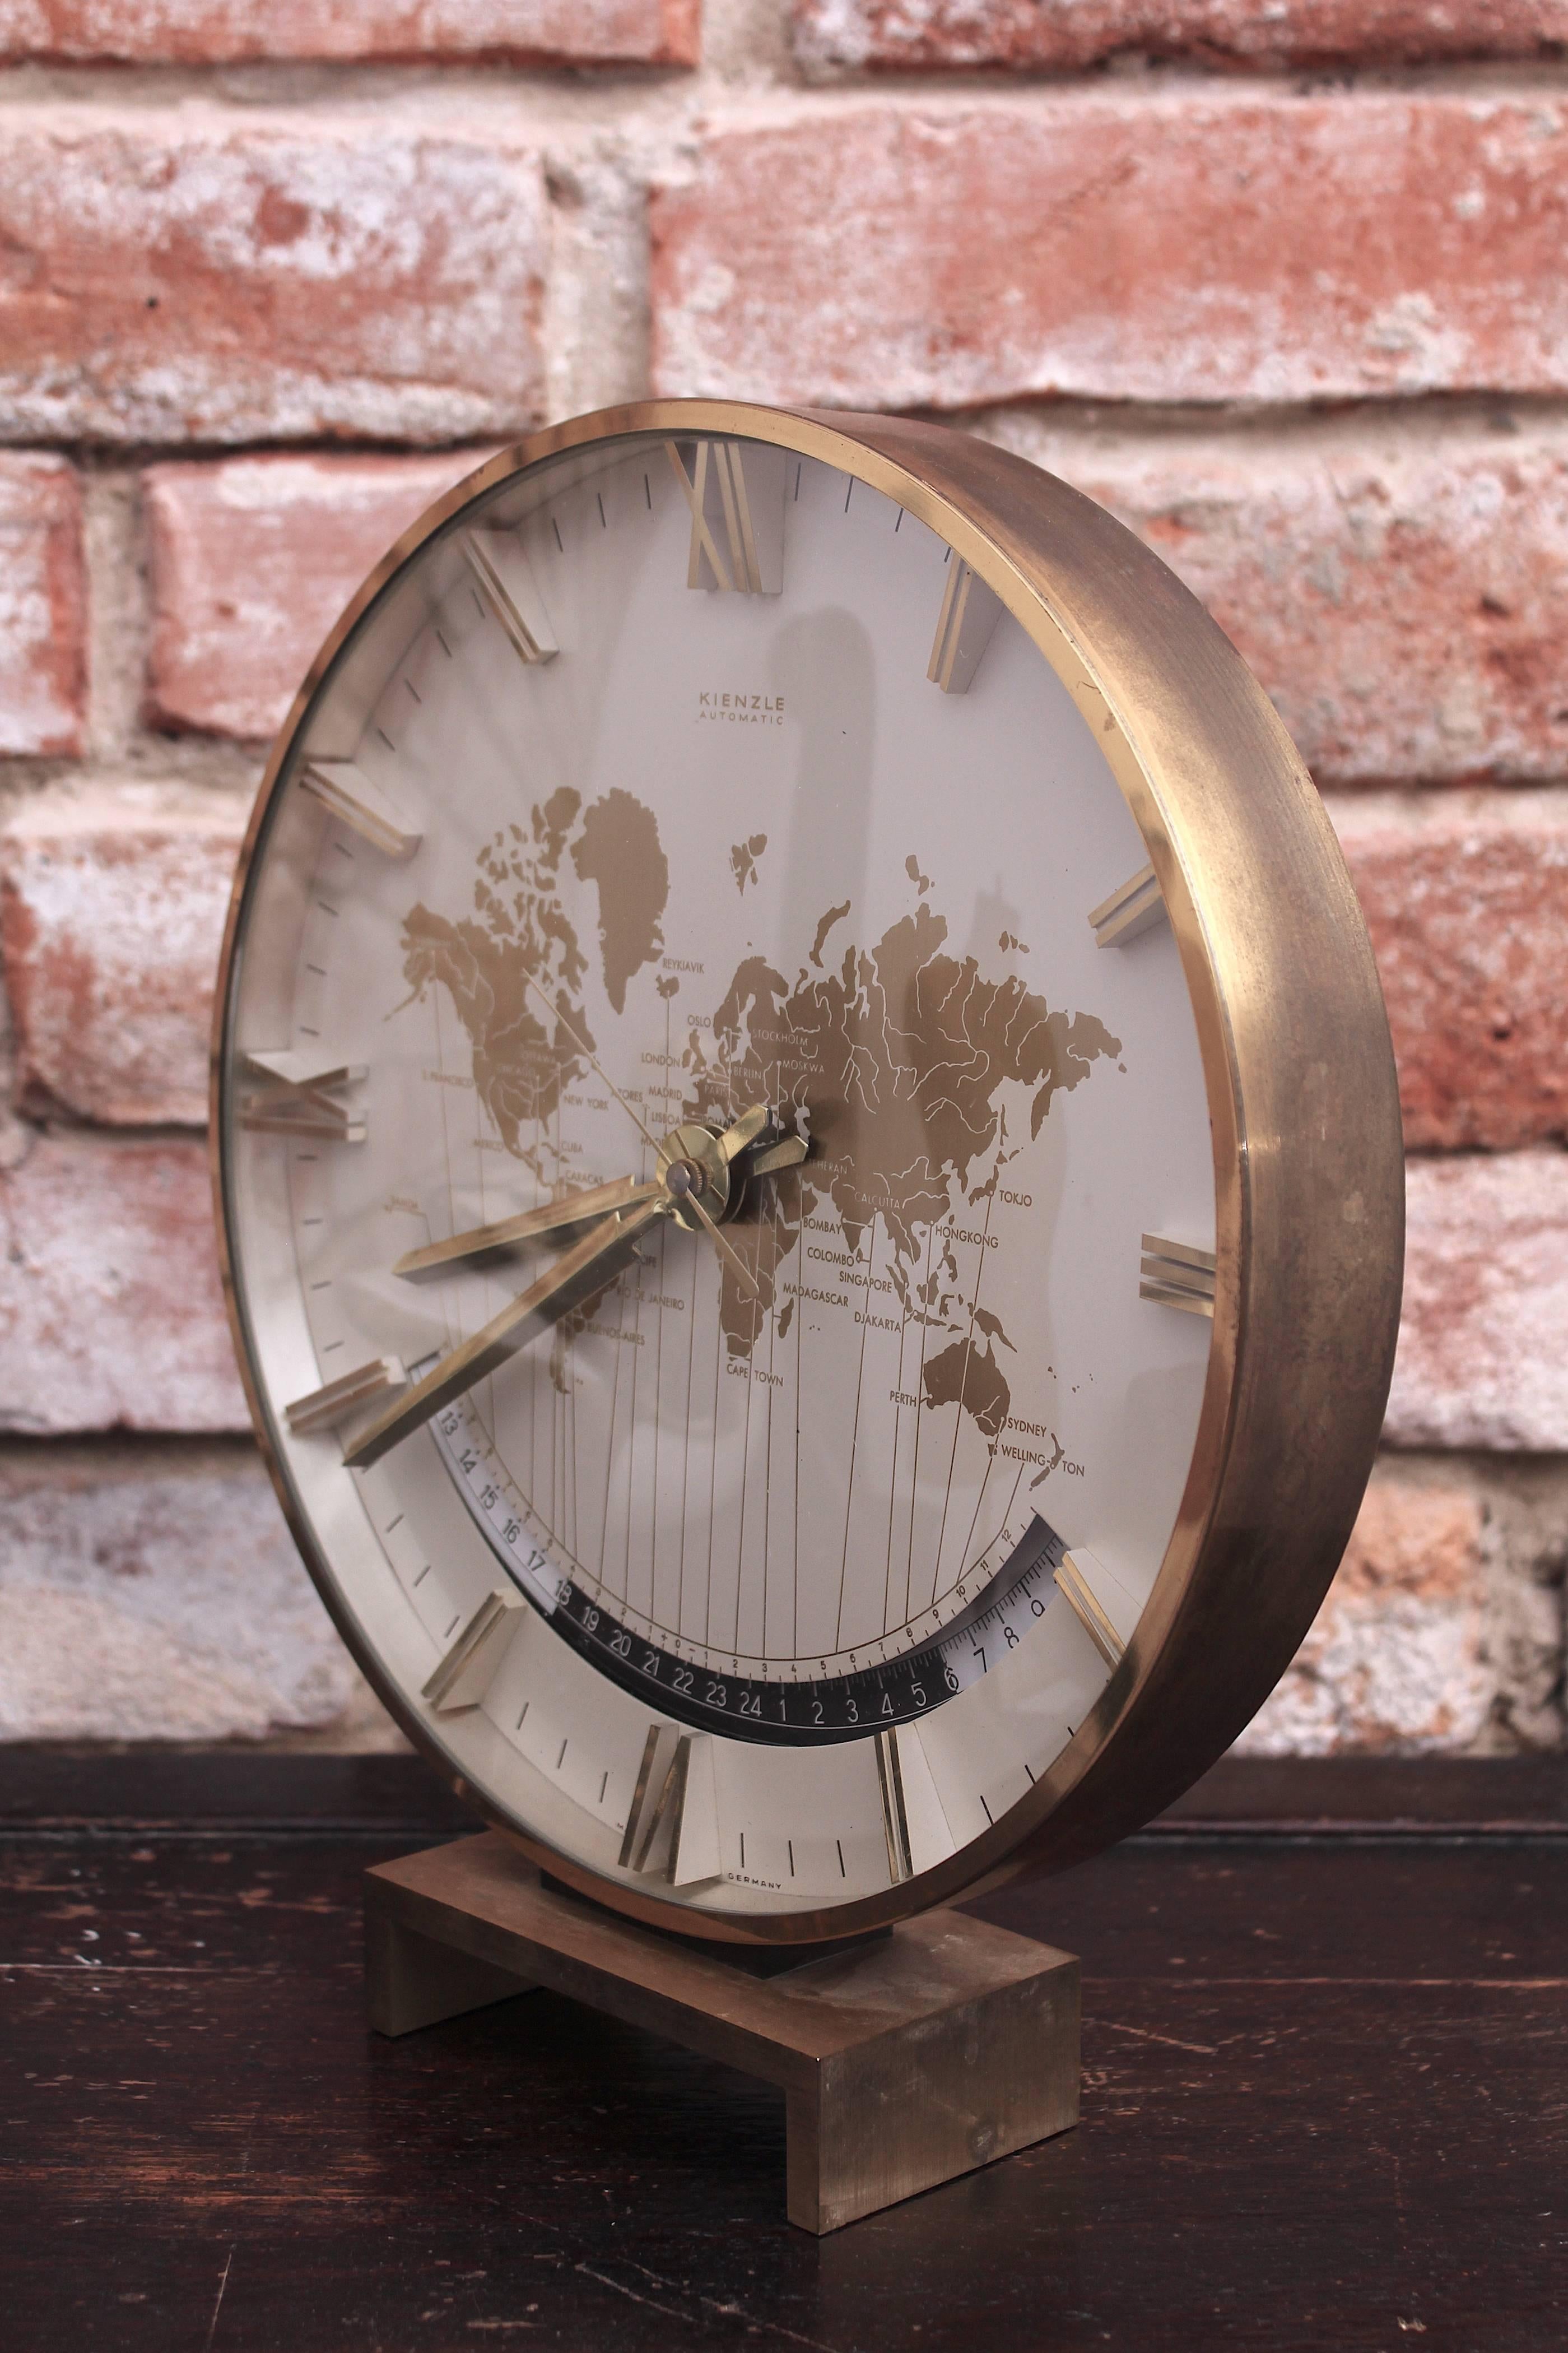 German Table Clock from Kienzle with World Time Zones Map, 1960s